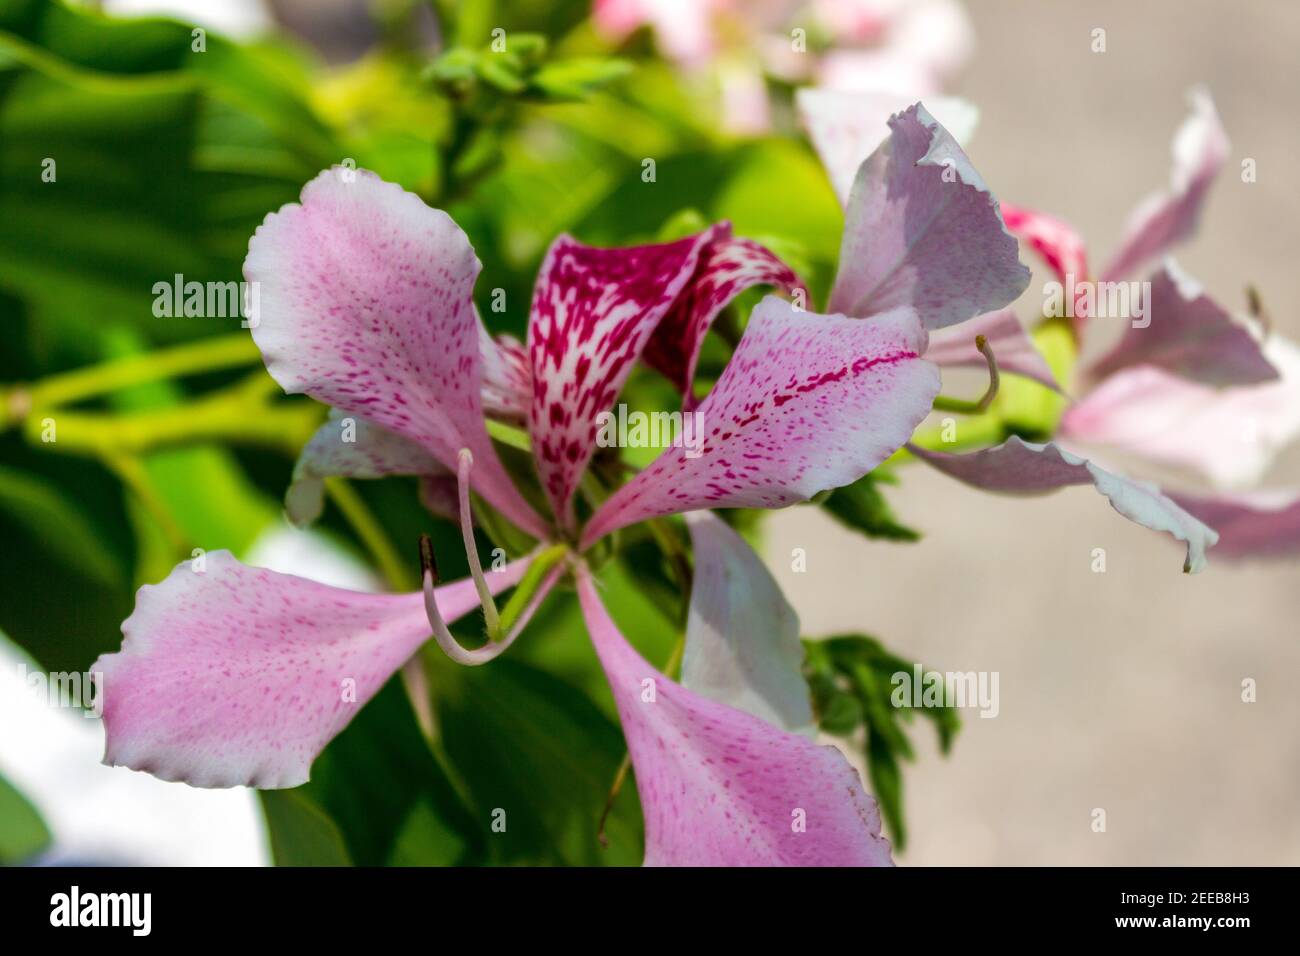 Bauhinia monandra is a species of leguminous trees, of the family Fabaceae. Common names include pink bauhinia, orchid tree, and Napoleon's plume. Stock Photo